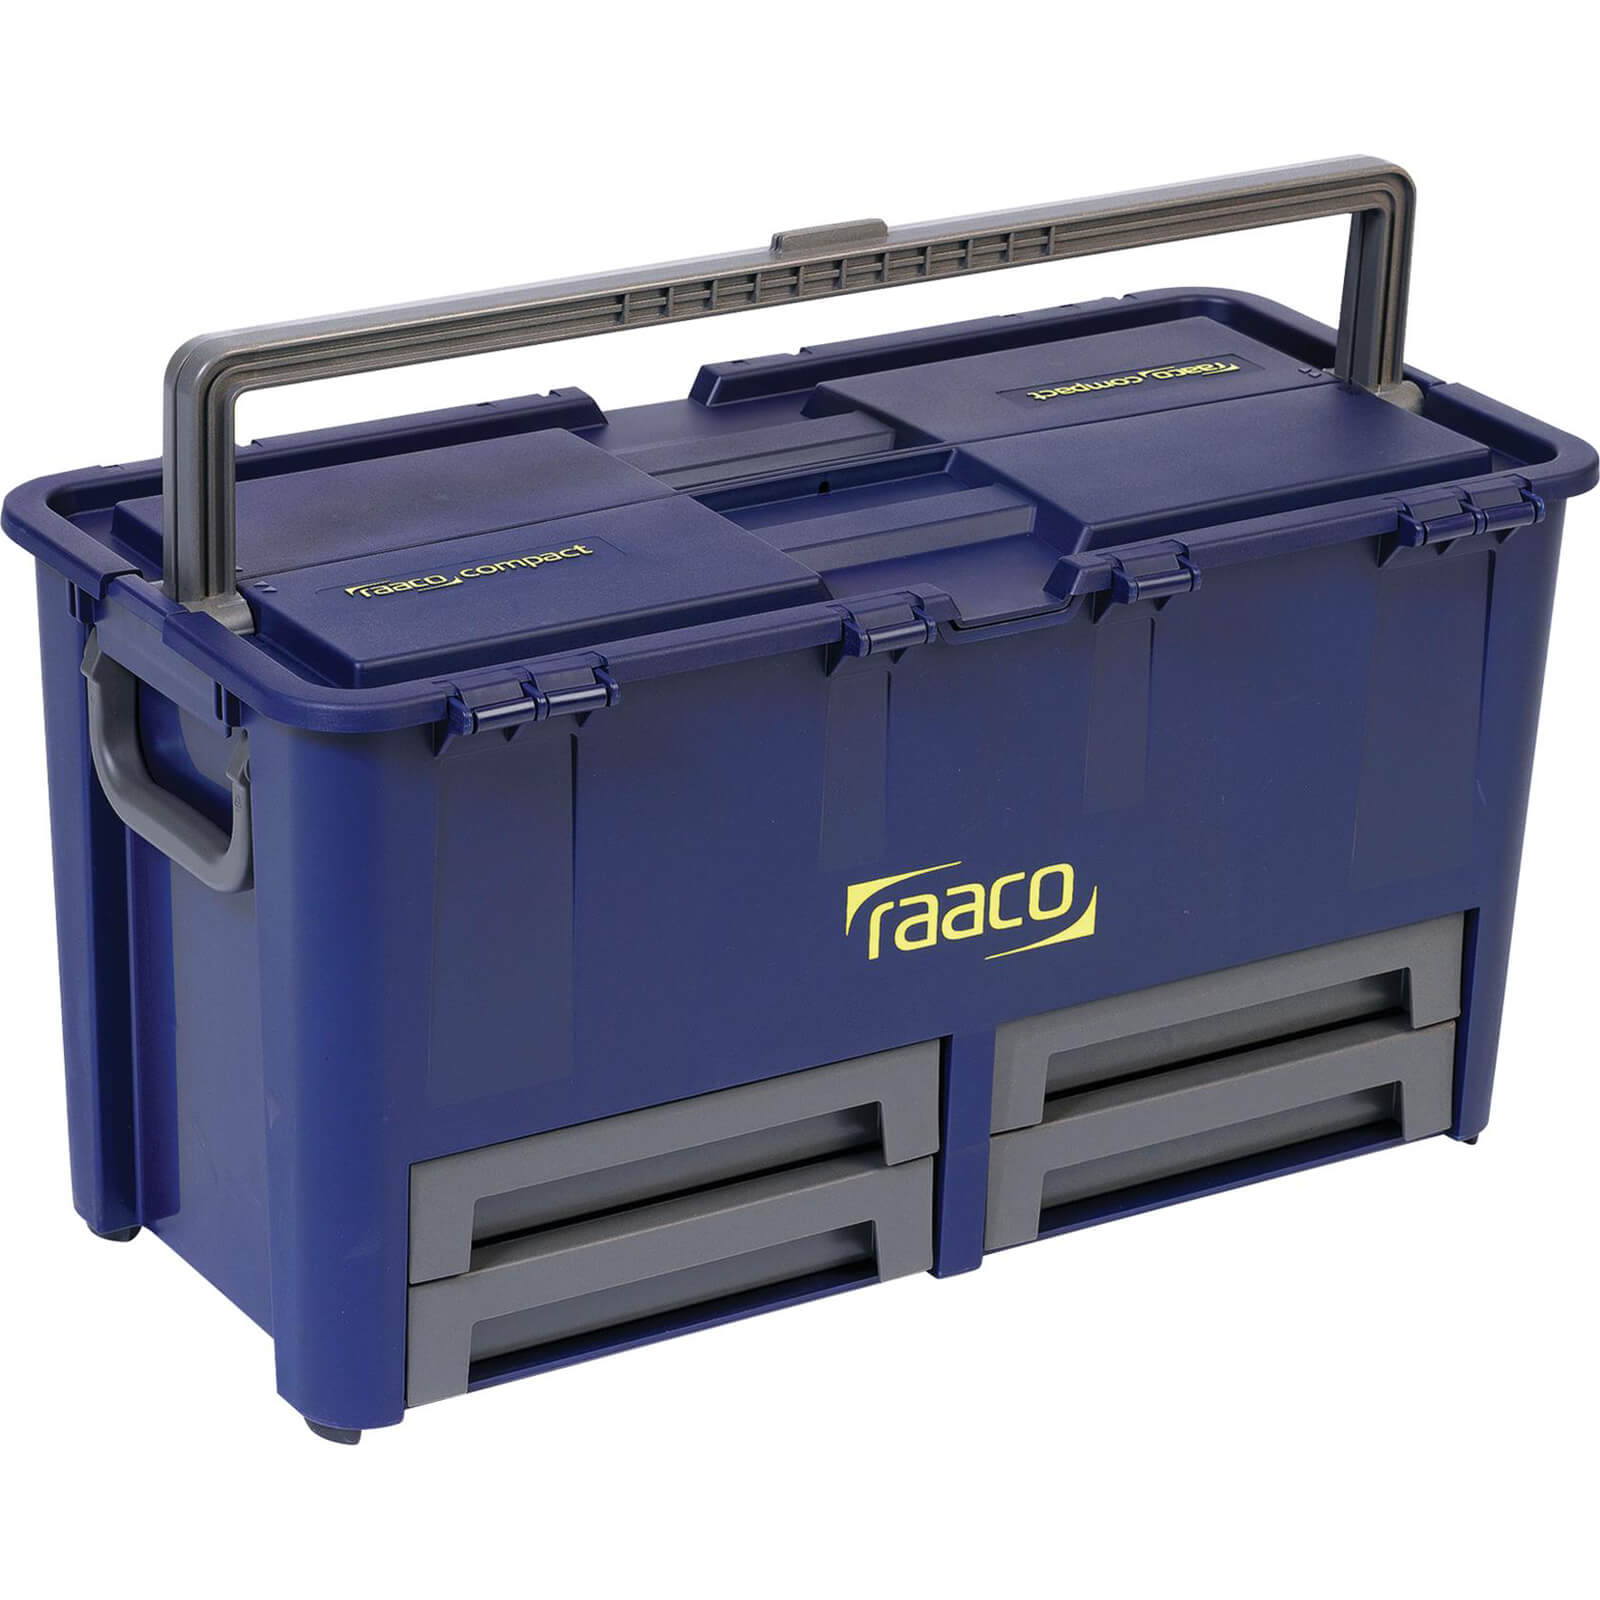 Image of Raaco Compact 62 Professional Engineers Tool Box 621mm 311mm 322mm